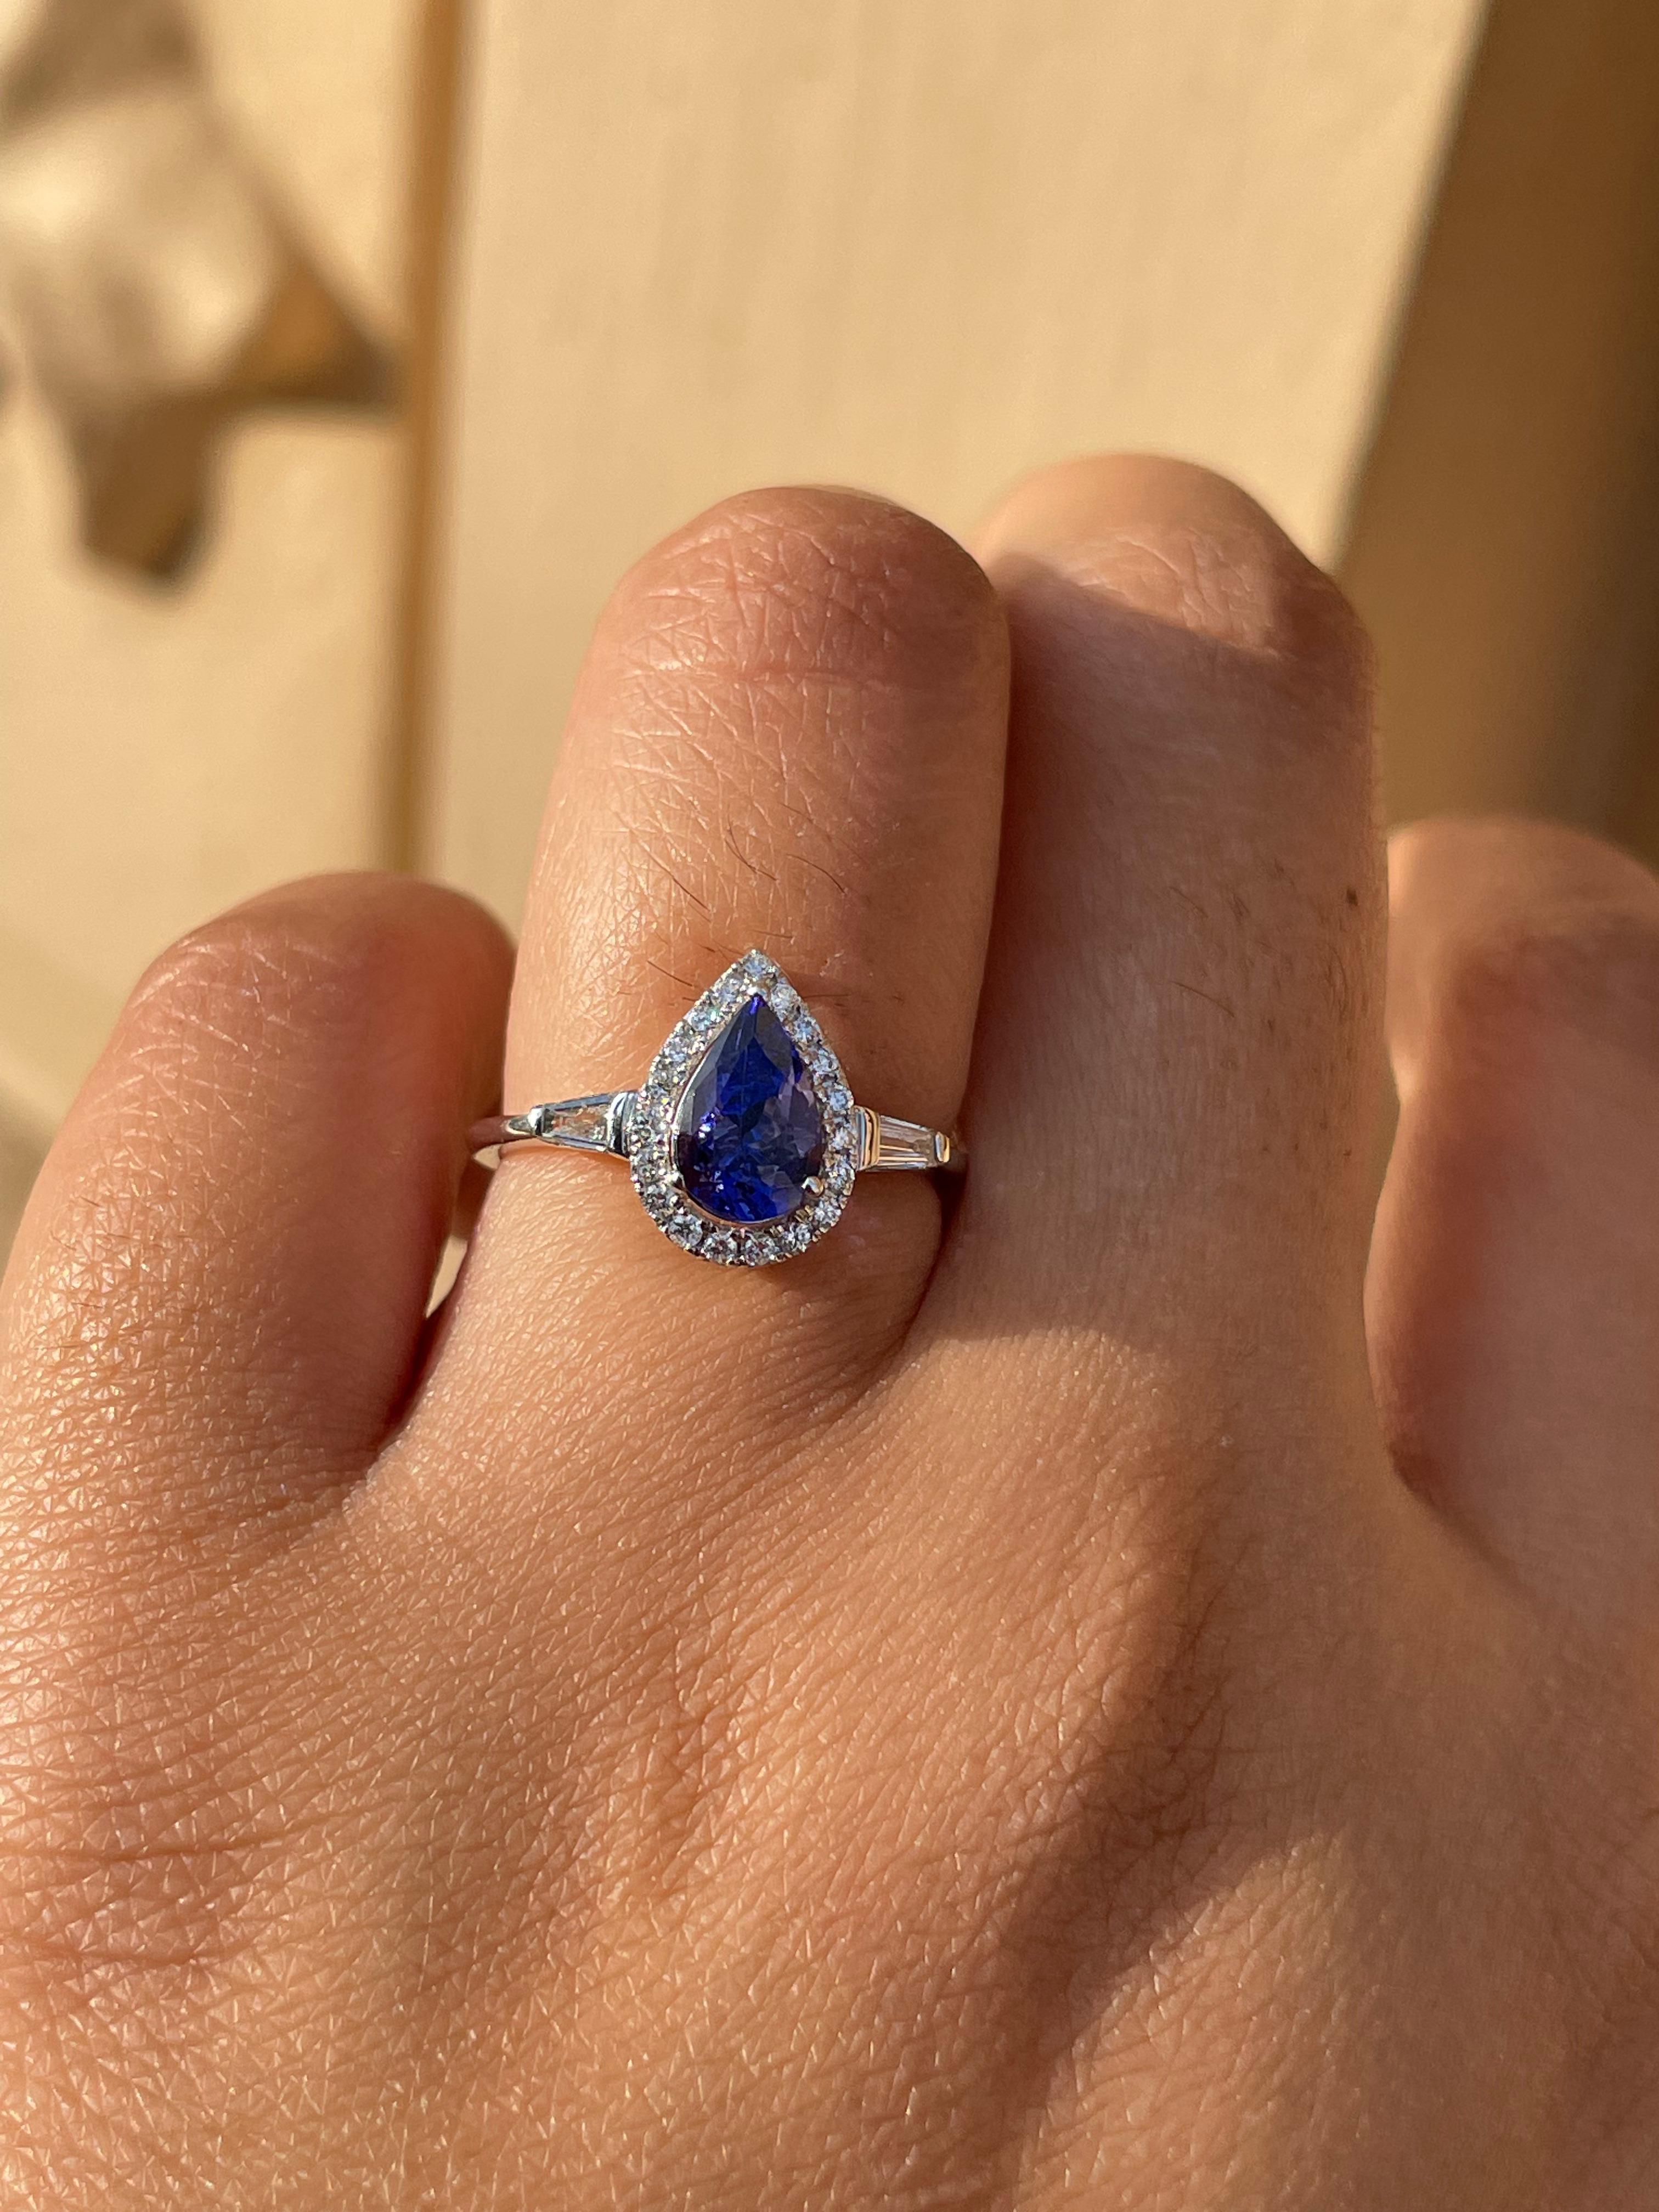 For Sale:  1.1 CTW Pear Shaped Tanzanite and Diamond Ring in 18k Solid White Gold 11